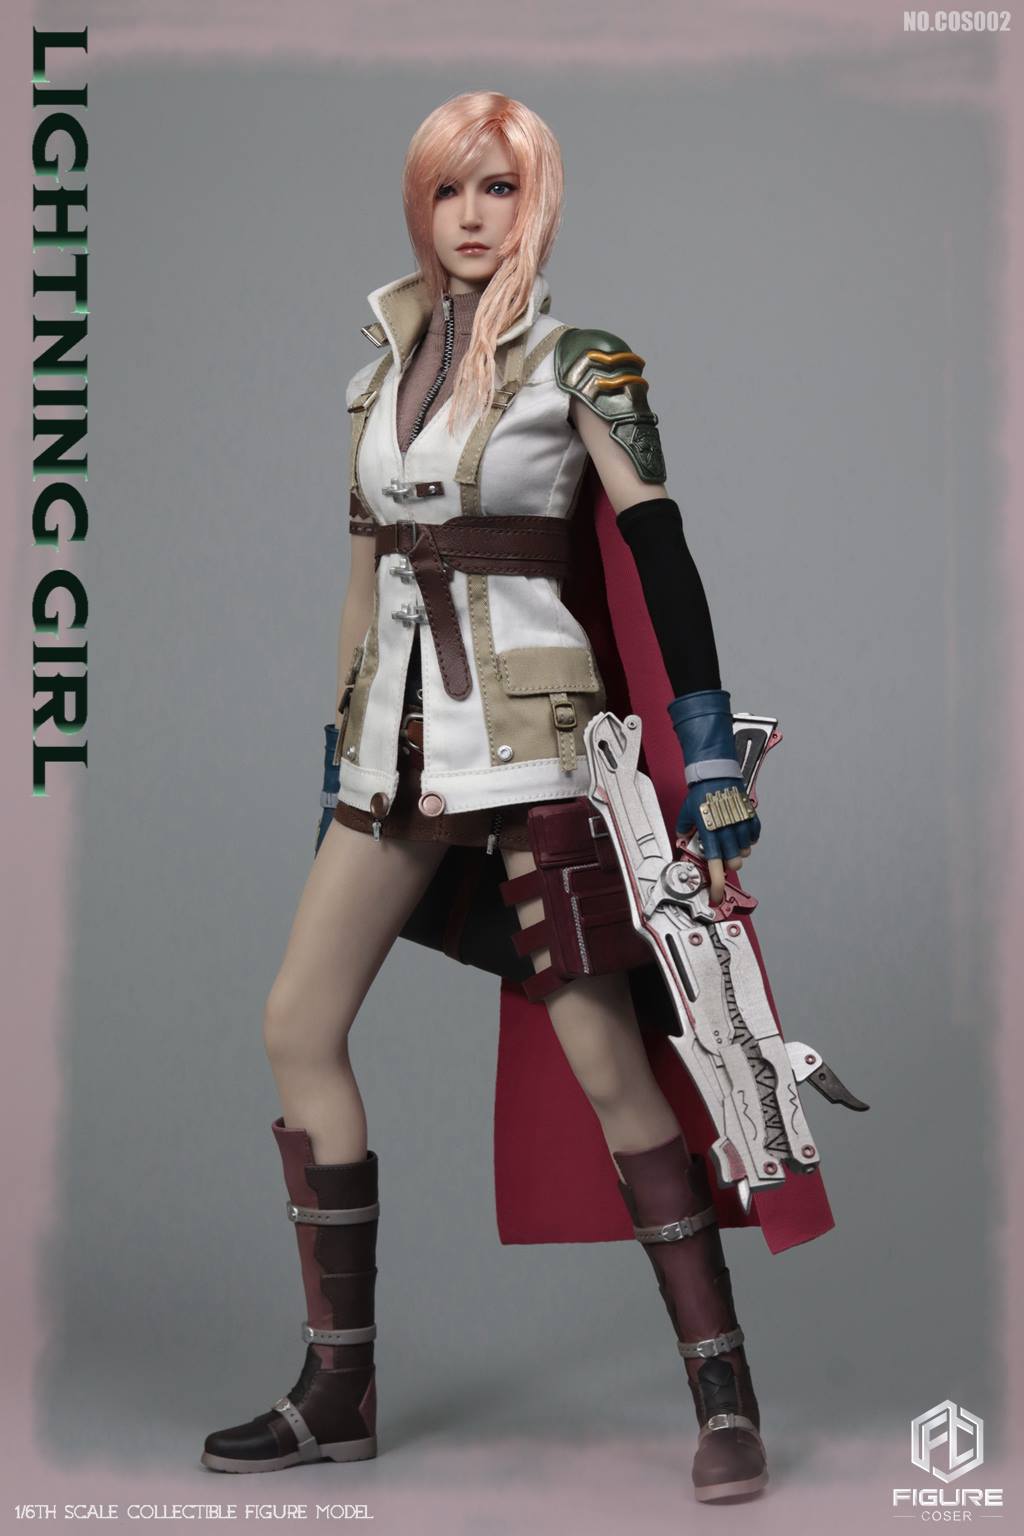 toyhaven: Figurecoser 1/6th scale Lightning Girl Outfit & Head Sculpt